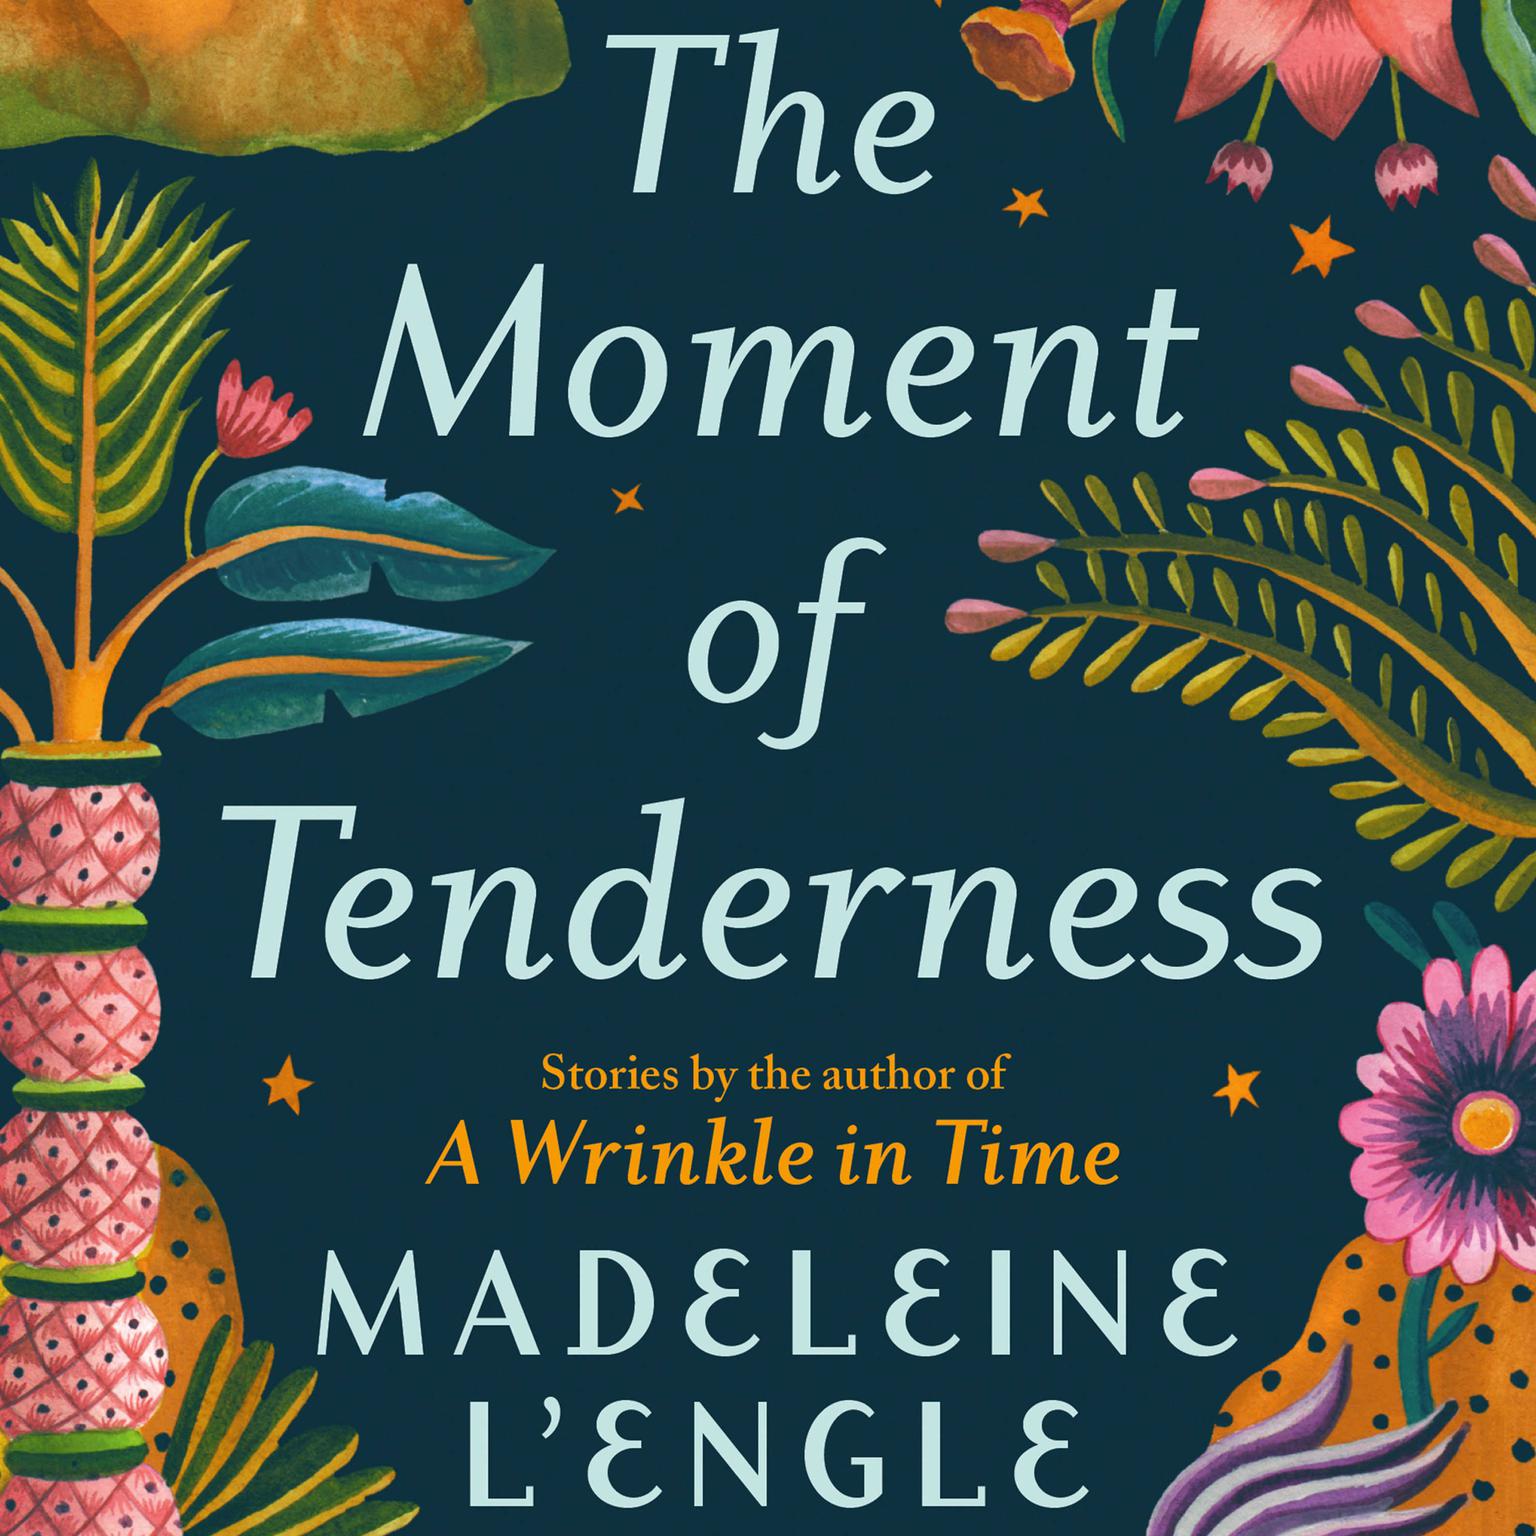 “The Fact of the Matter” an audiobook excerpt from The Moment of Tenderness Audiobook, by Madeleine L’Engle